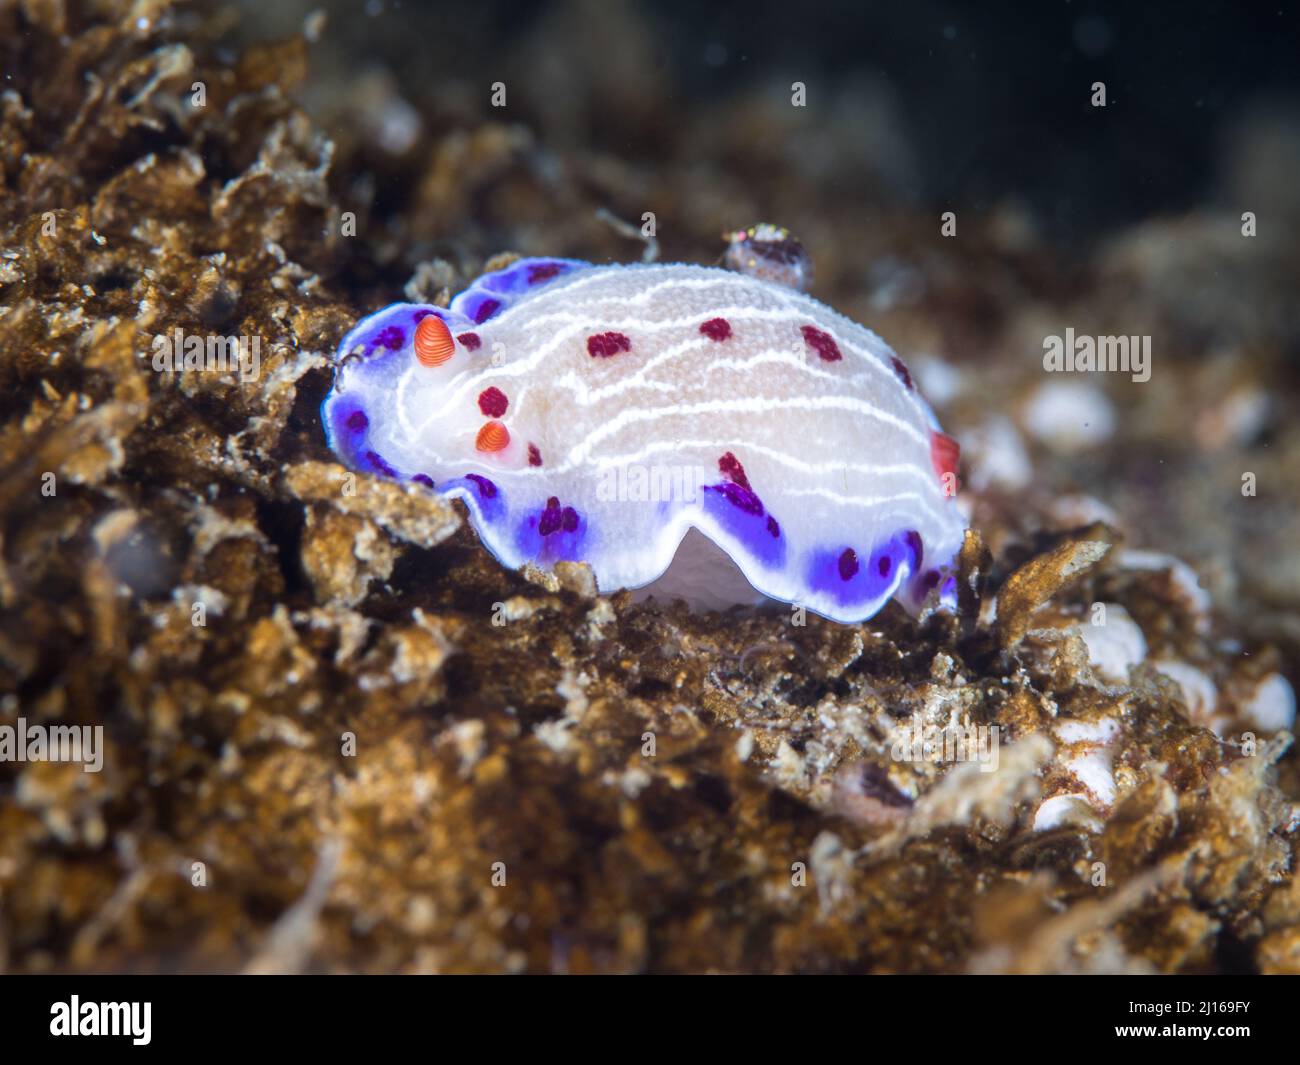 Cape dorid (Hypselodoris capensis) nudibranch underwater, a white-bodied sea slug with purple-spotted margin and white lines and red spots Stock Photo